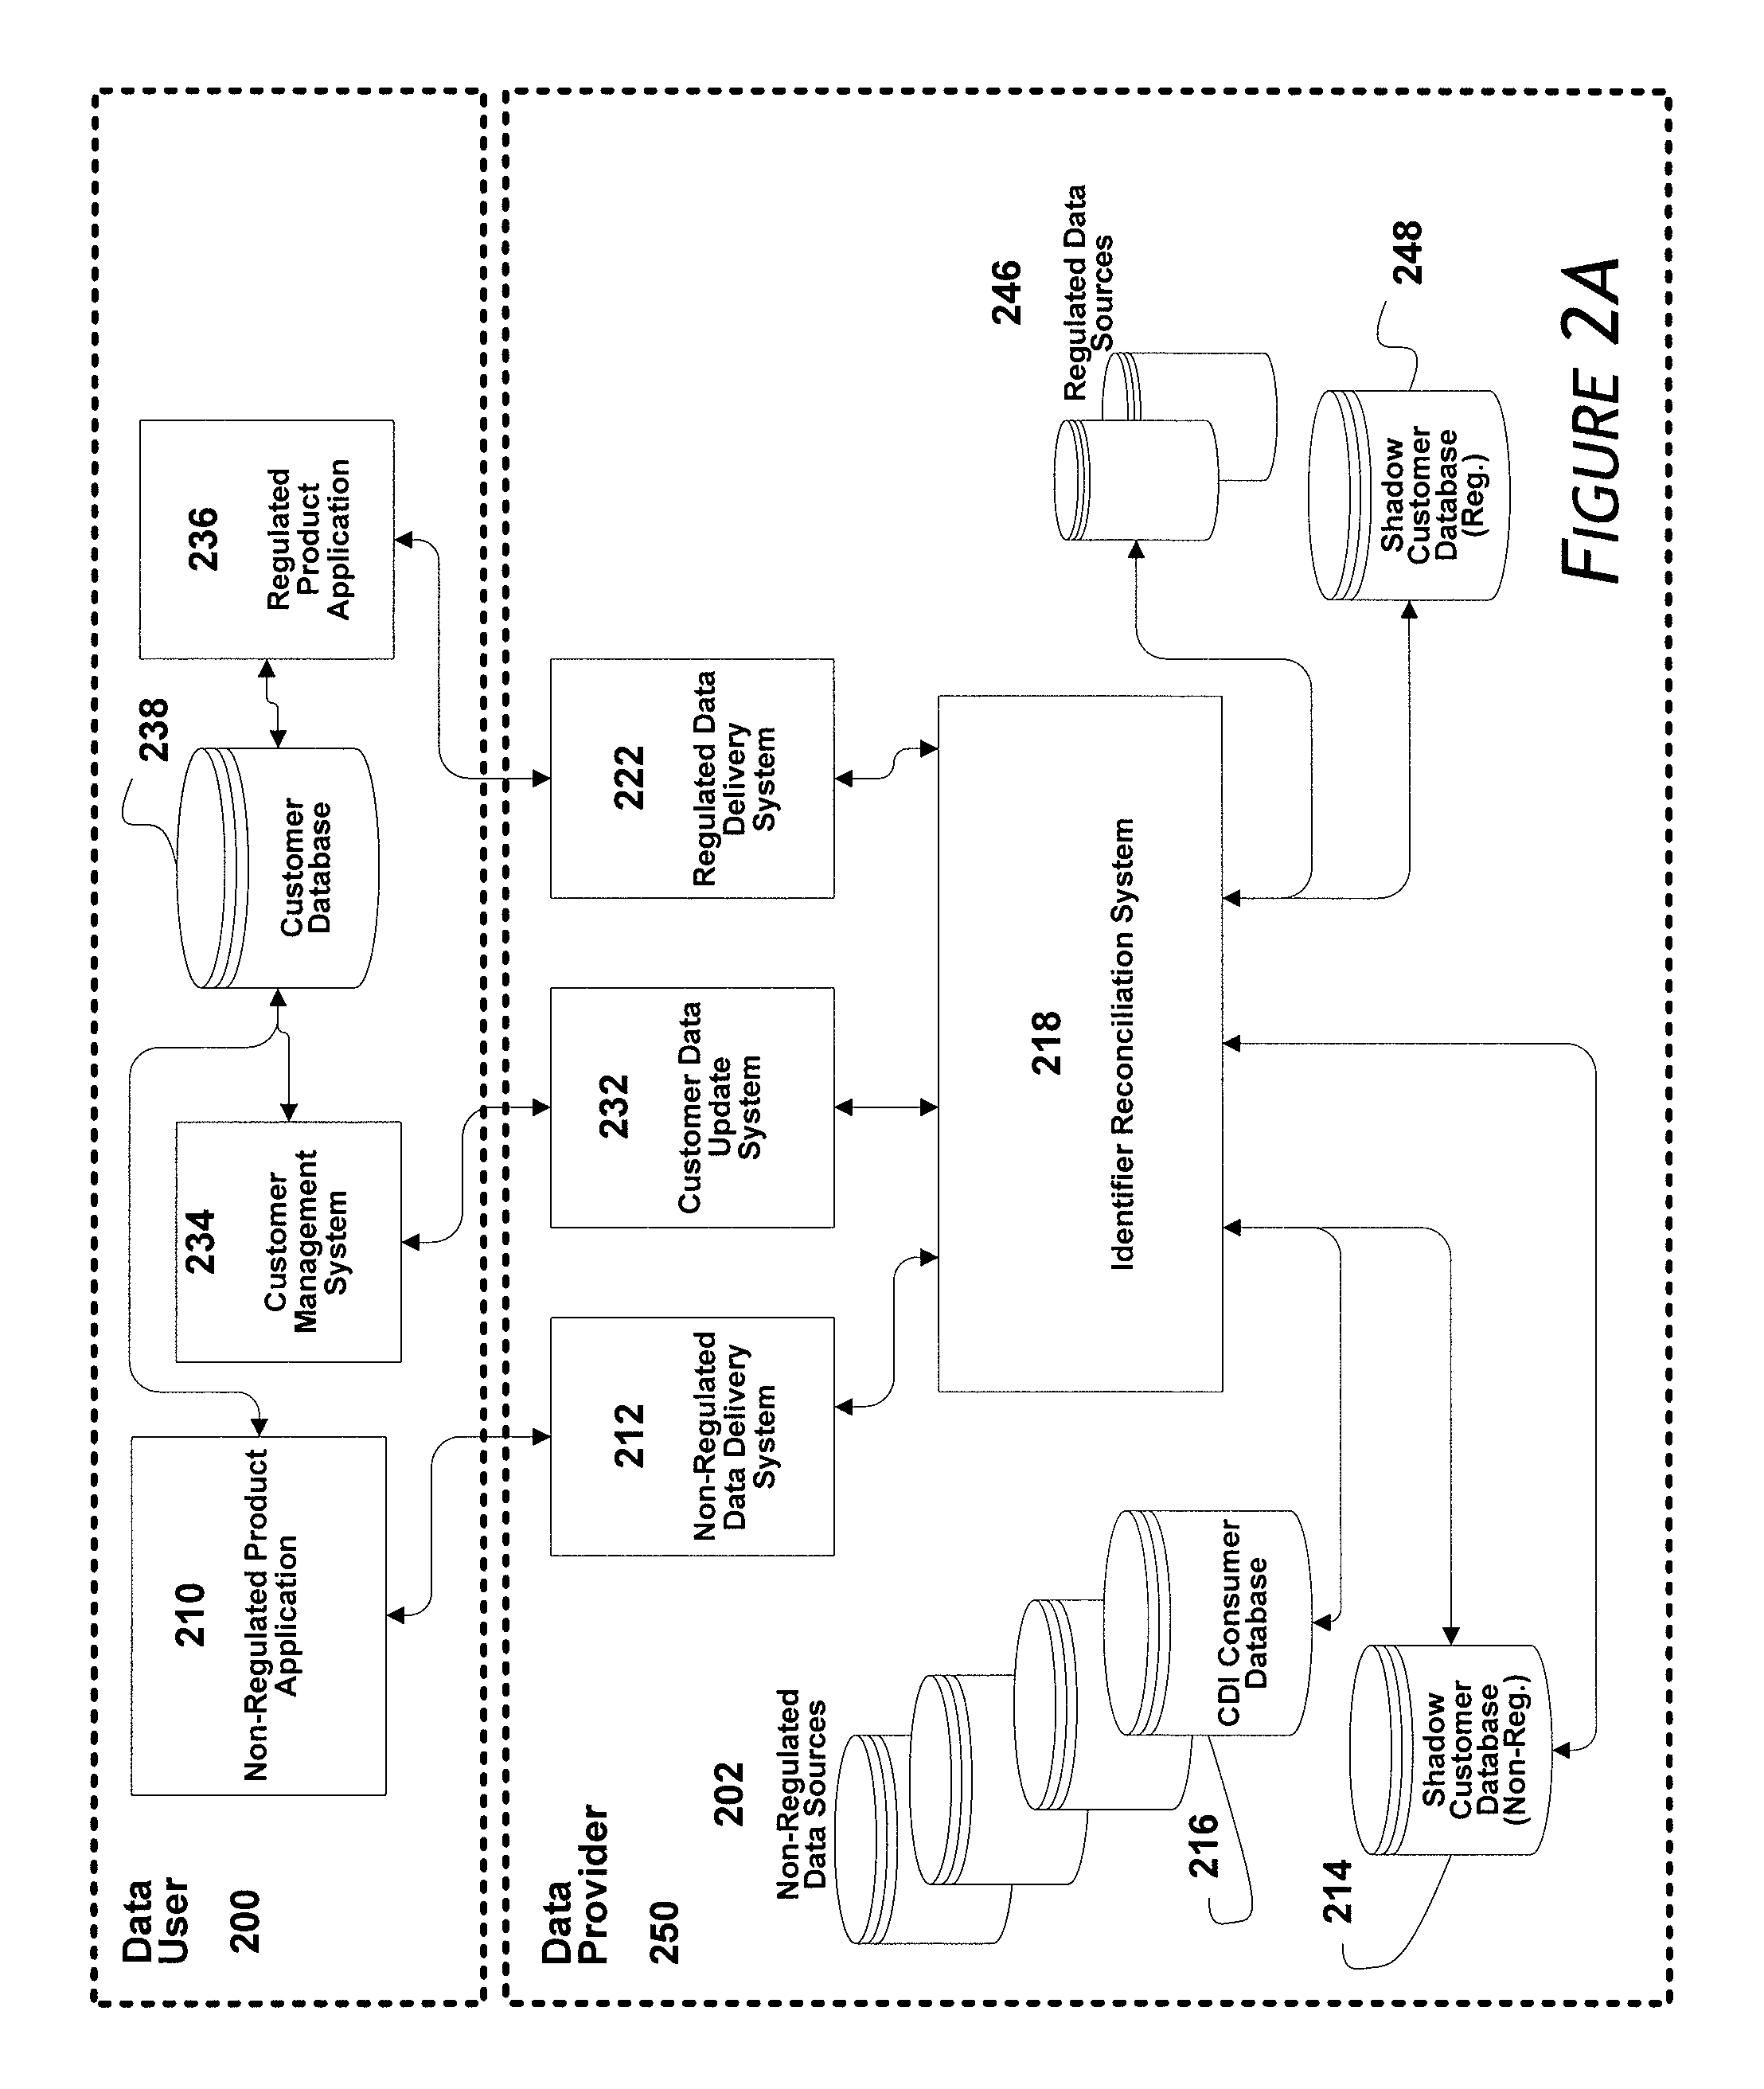 Systems and methods for providing an integrated identifier